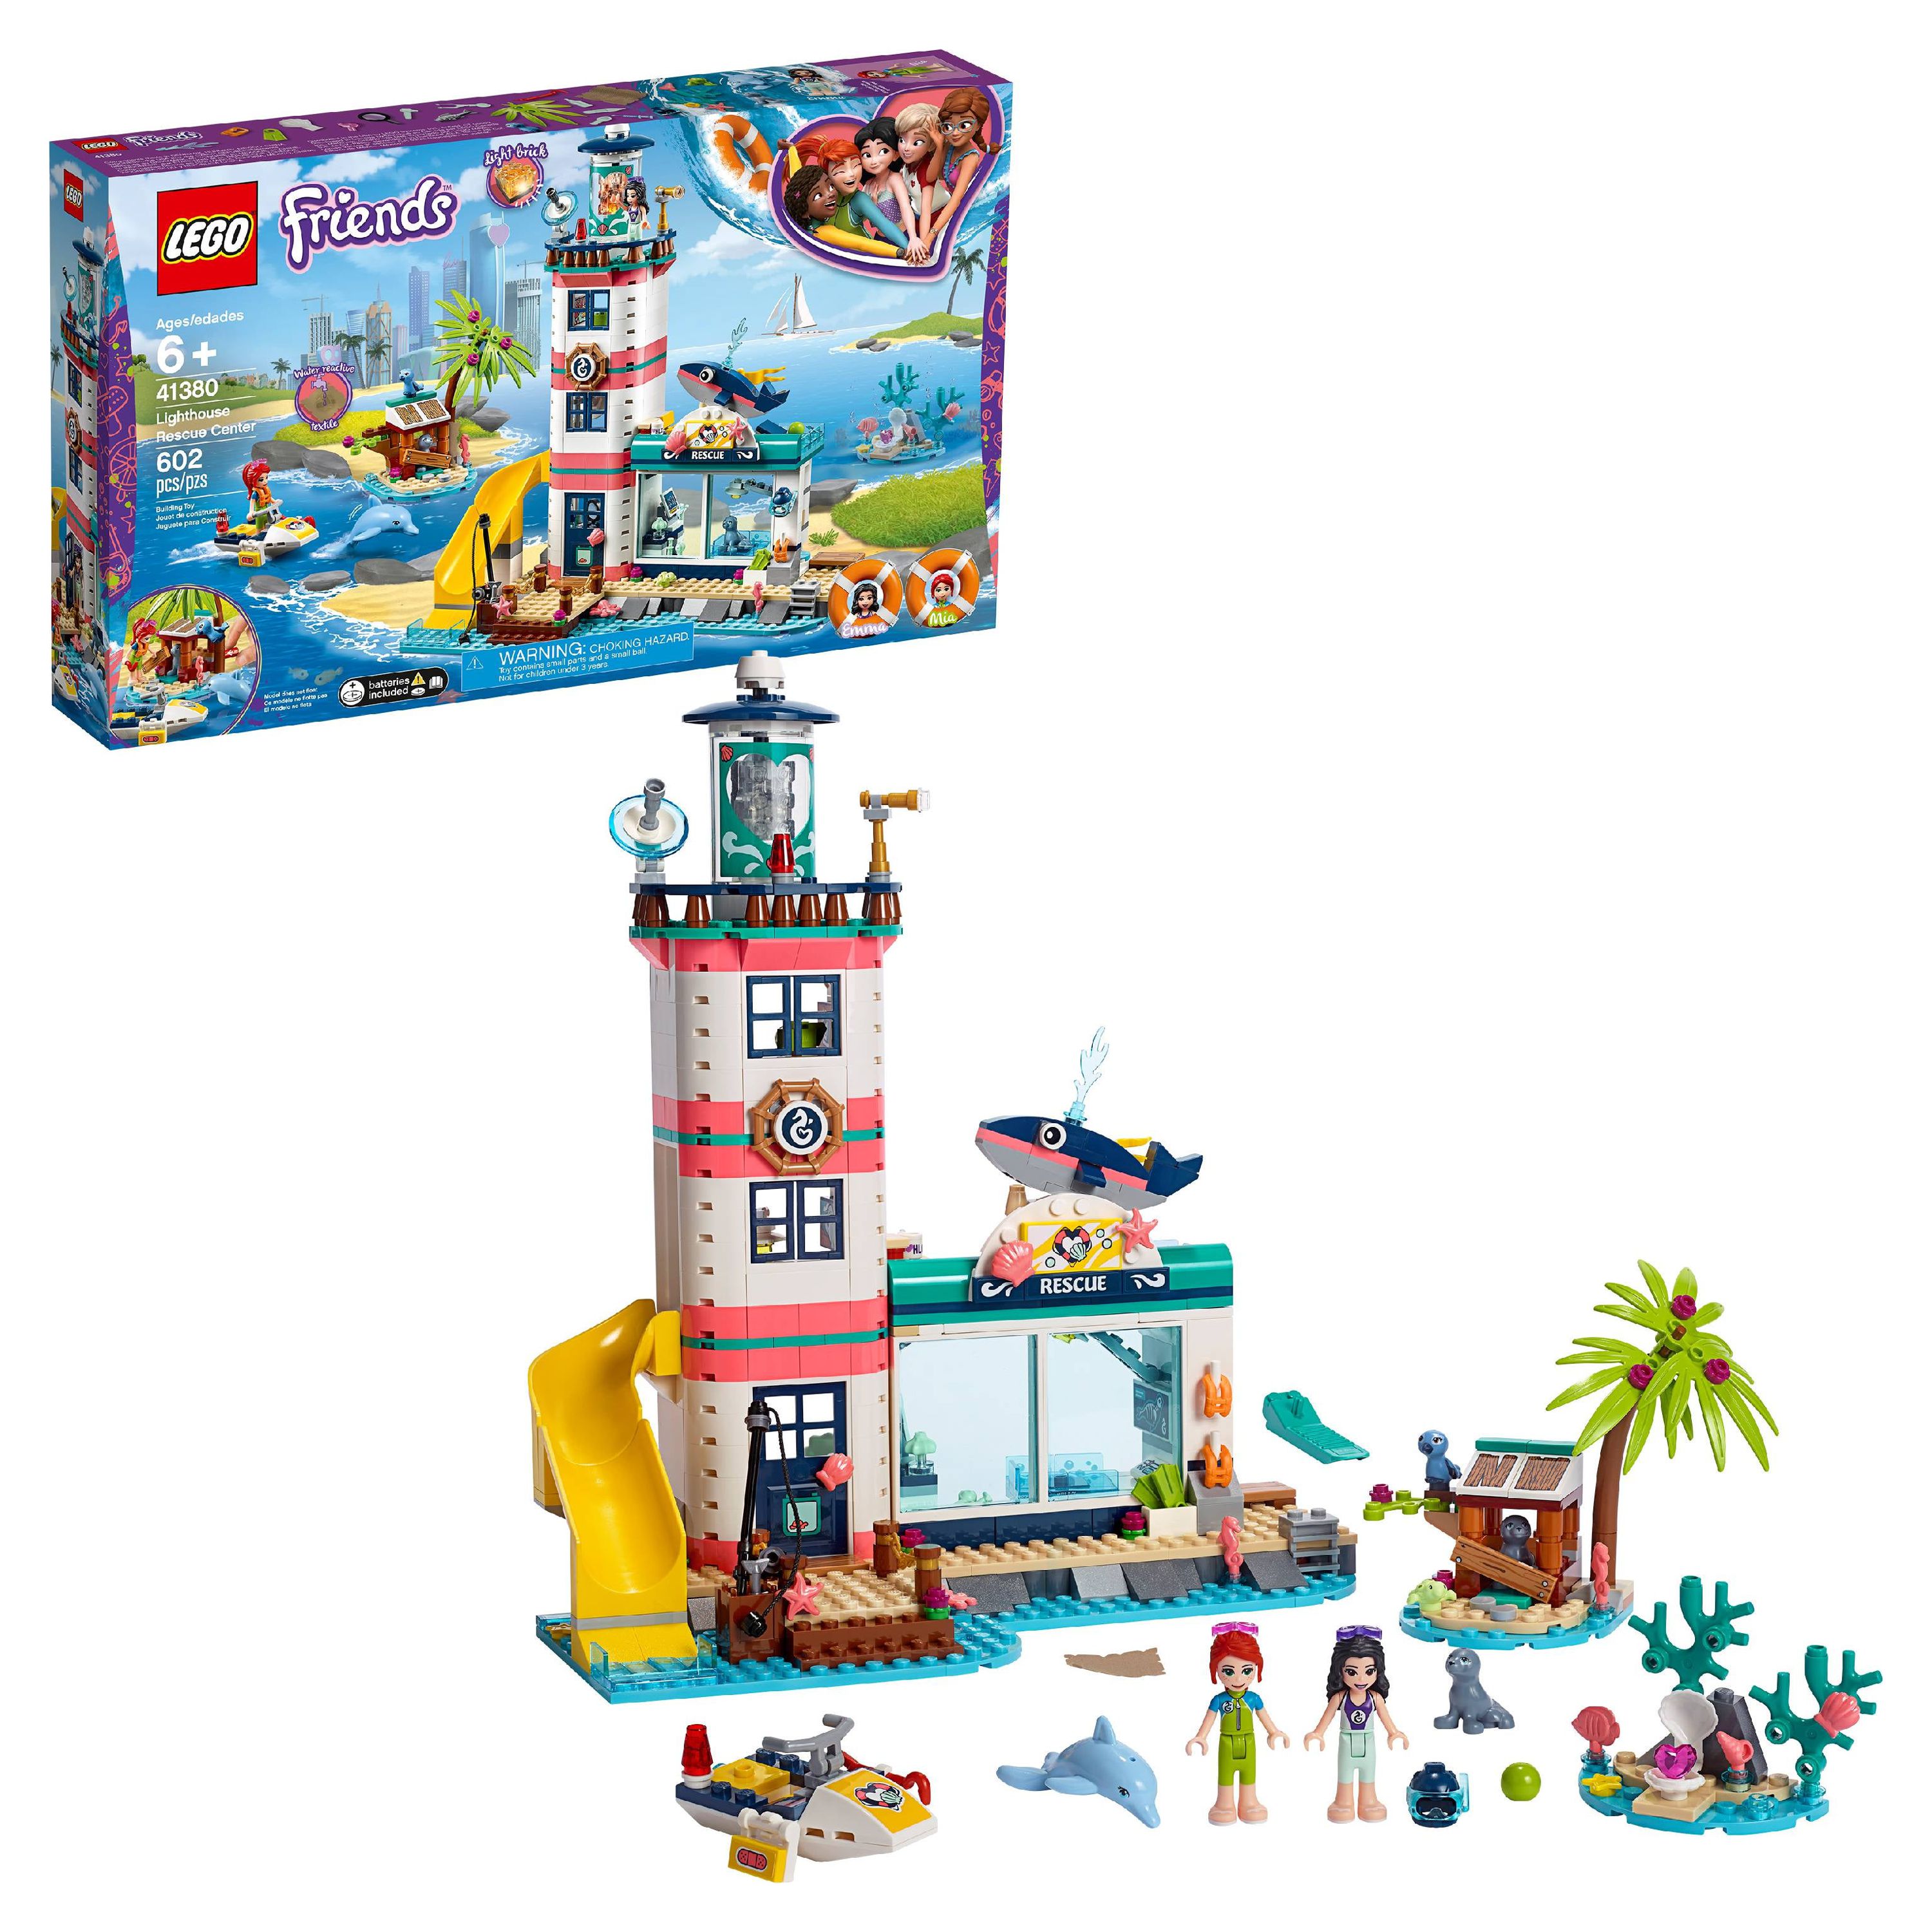 LEGO Friends Lighthouse Rescue Center 41380 Building Kit (602 Pieces) - image 1 of 8